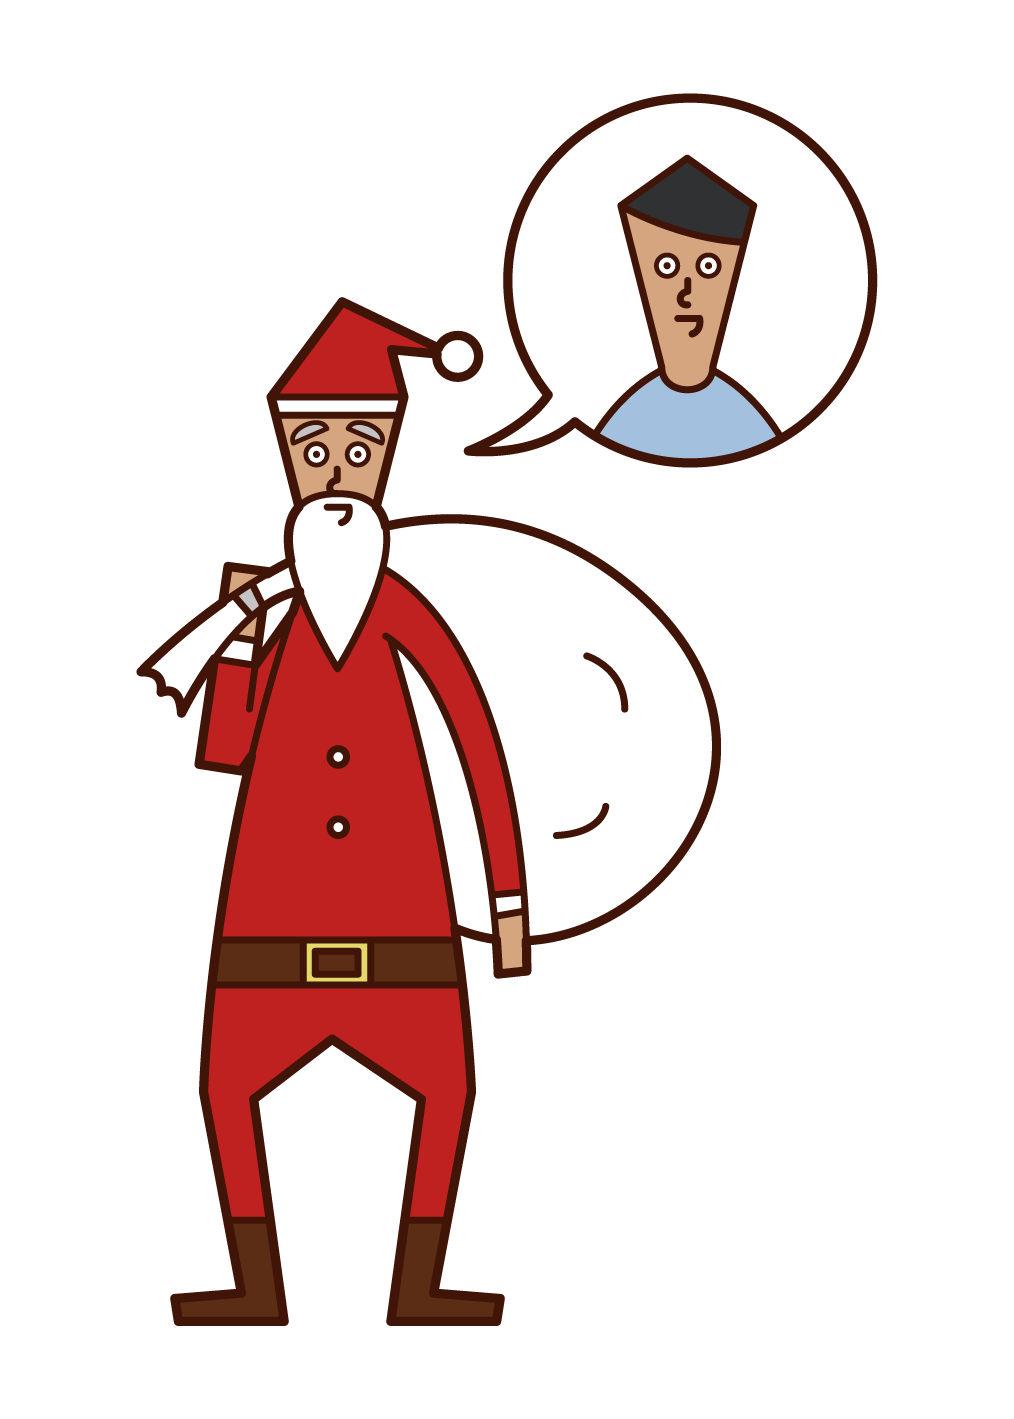 Illustration of Santa Claus (man) disguised by his father